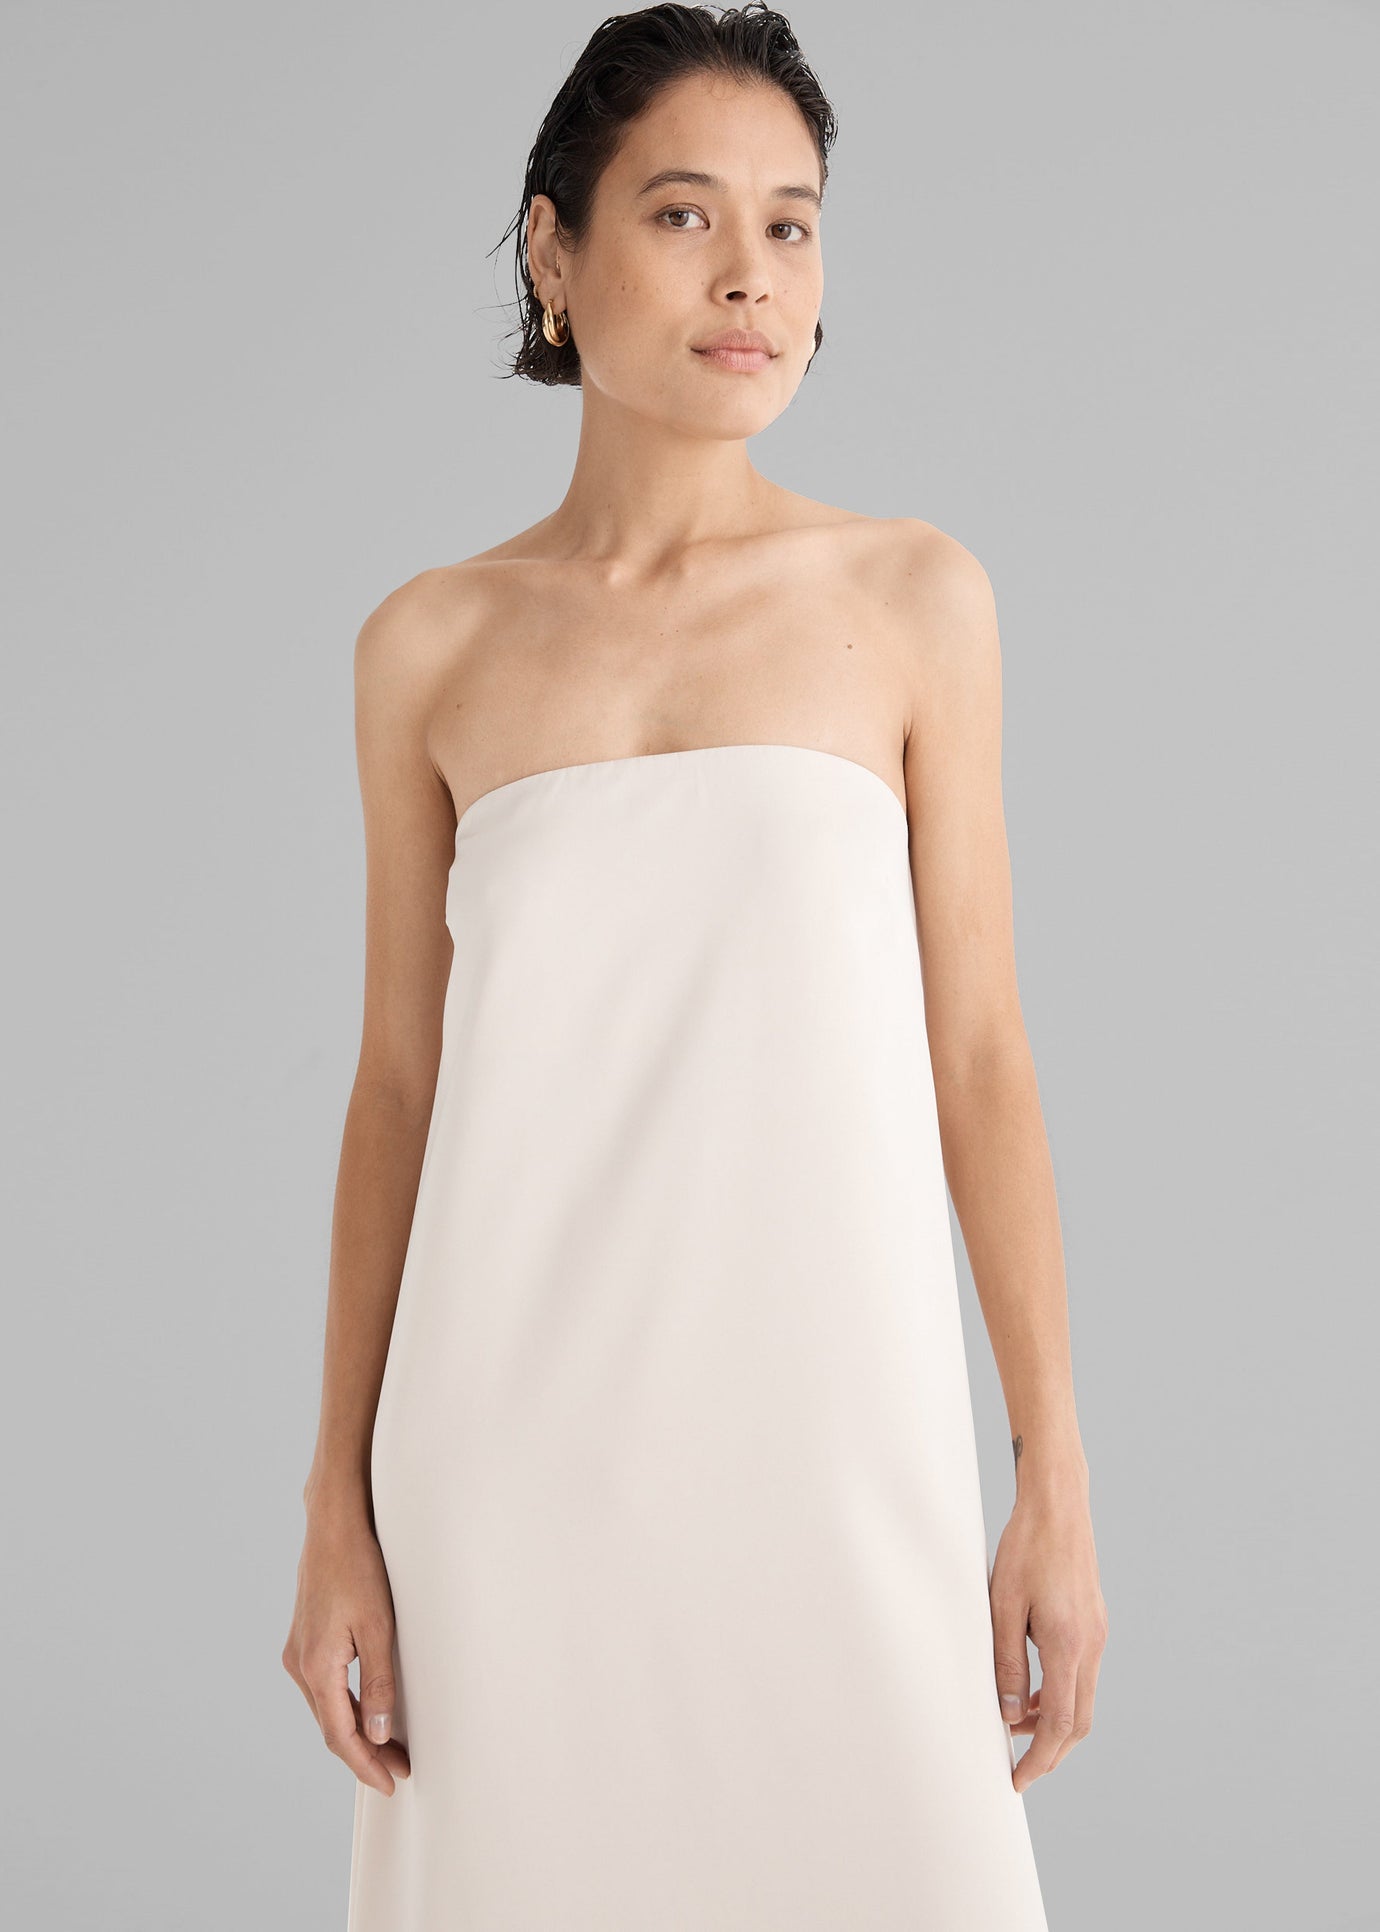 Solaqua The Fille Dress - Oyster - 1